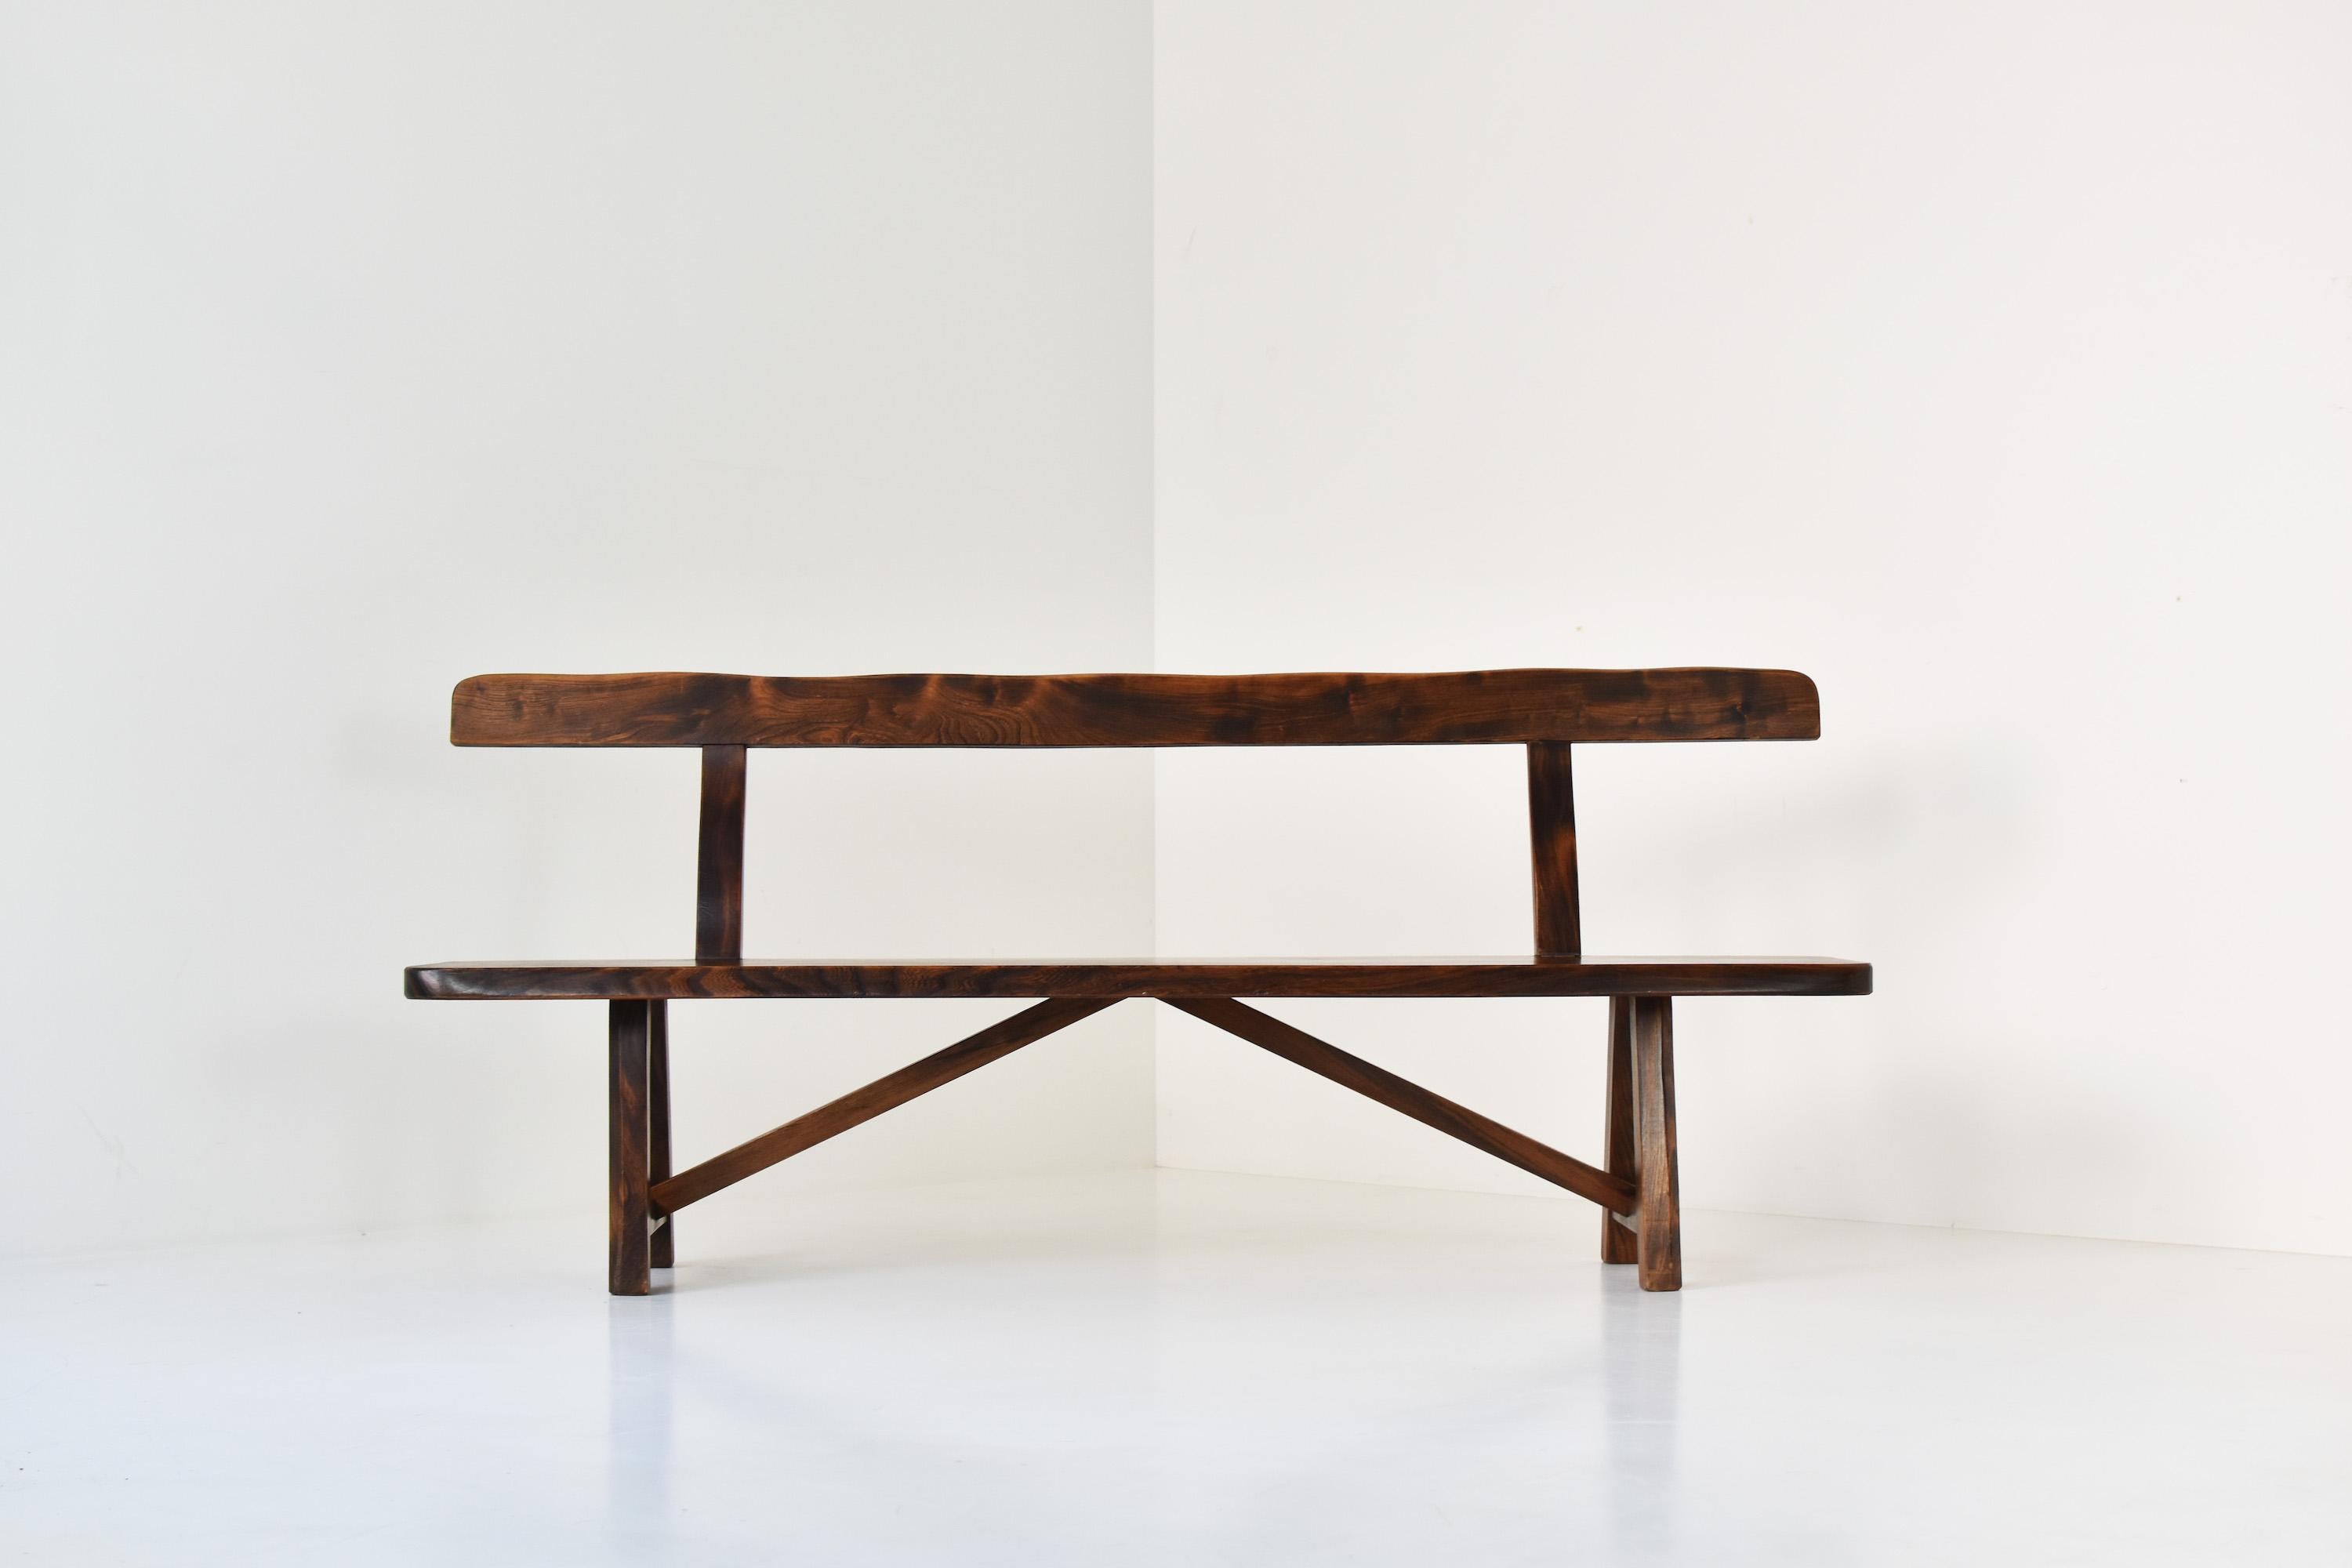 Sculptural bench by Olavi Hanninen for Mikko Nupponen, Finland 1950’s. This bench is made of stained elm wood and sculpturally crafted by hand. Very well presented original condition.